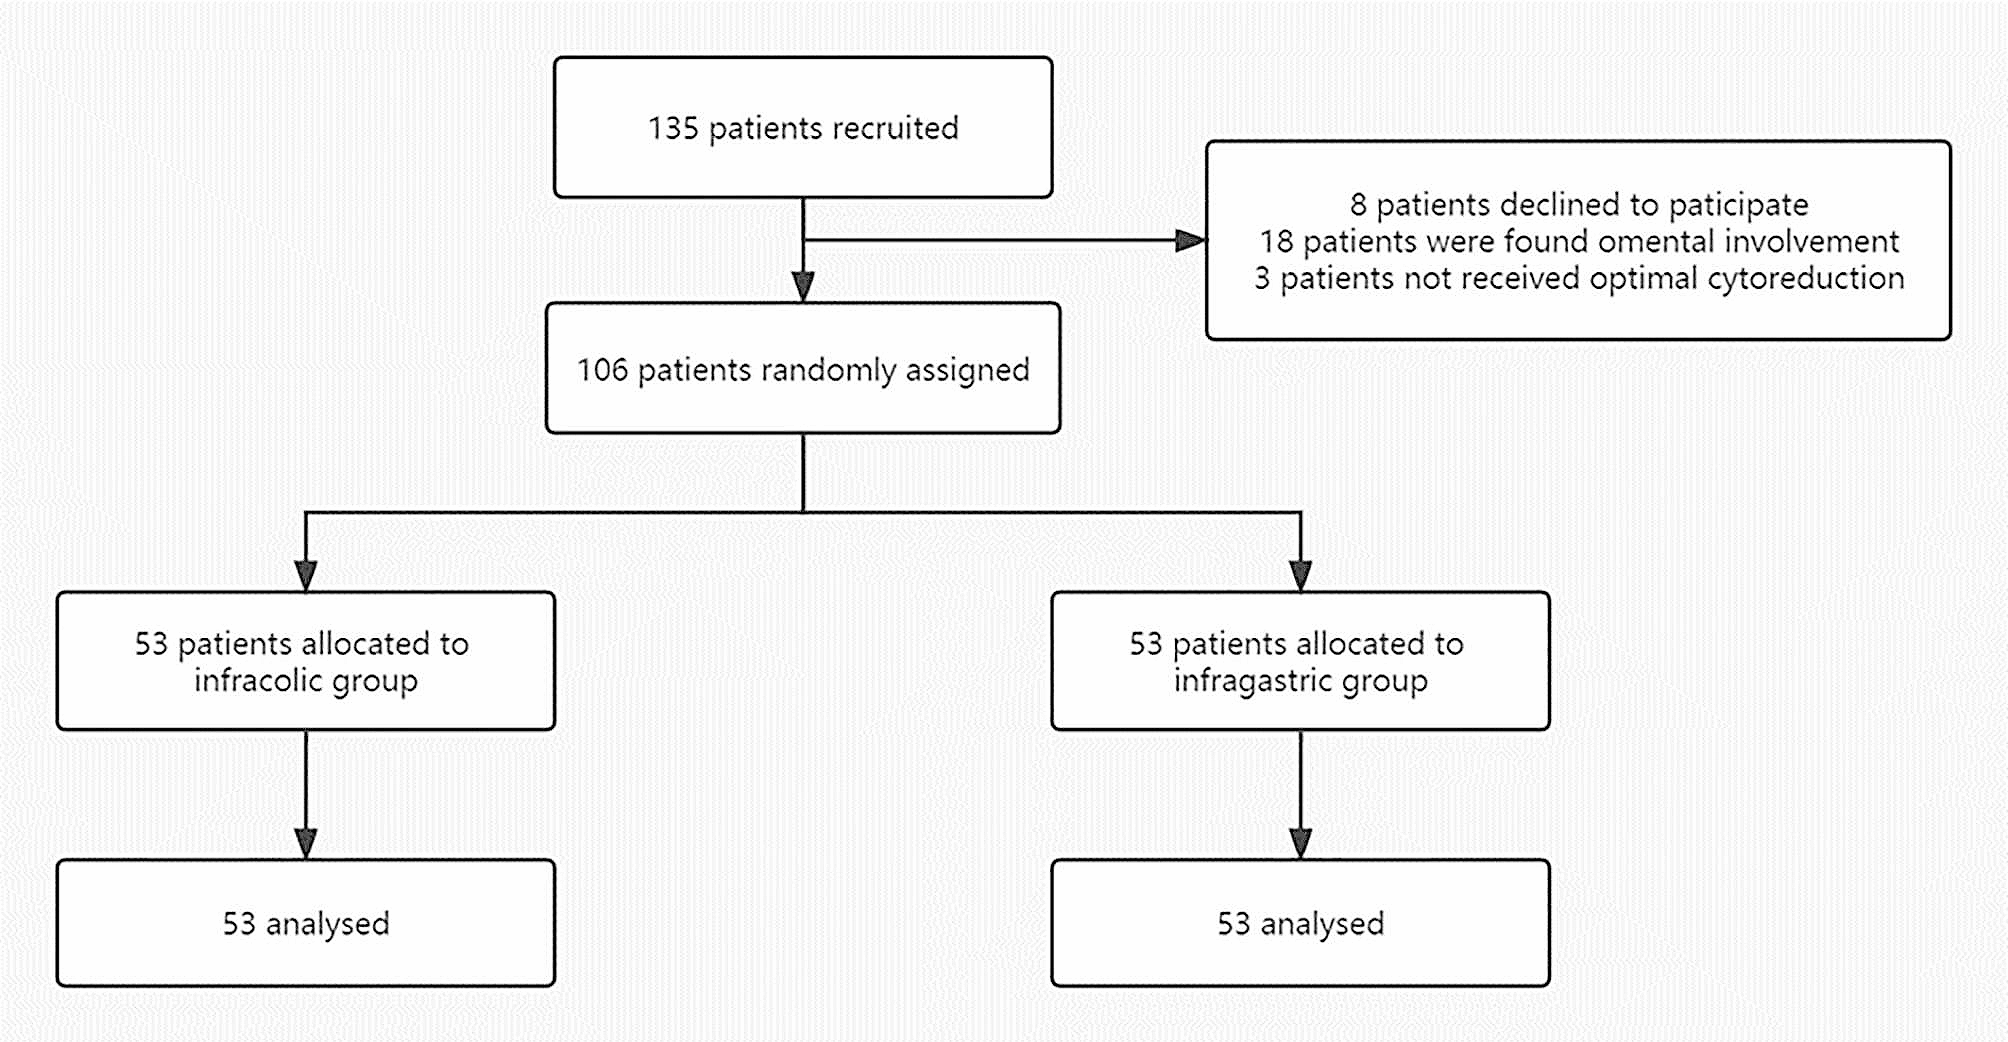 A randomized controlled trial to compare short-term outcomes following infragastric and infracolic omentectomy at the time of primary debulking surgery for epithelial ovarian cancer with normal-appearing omentum